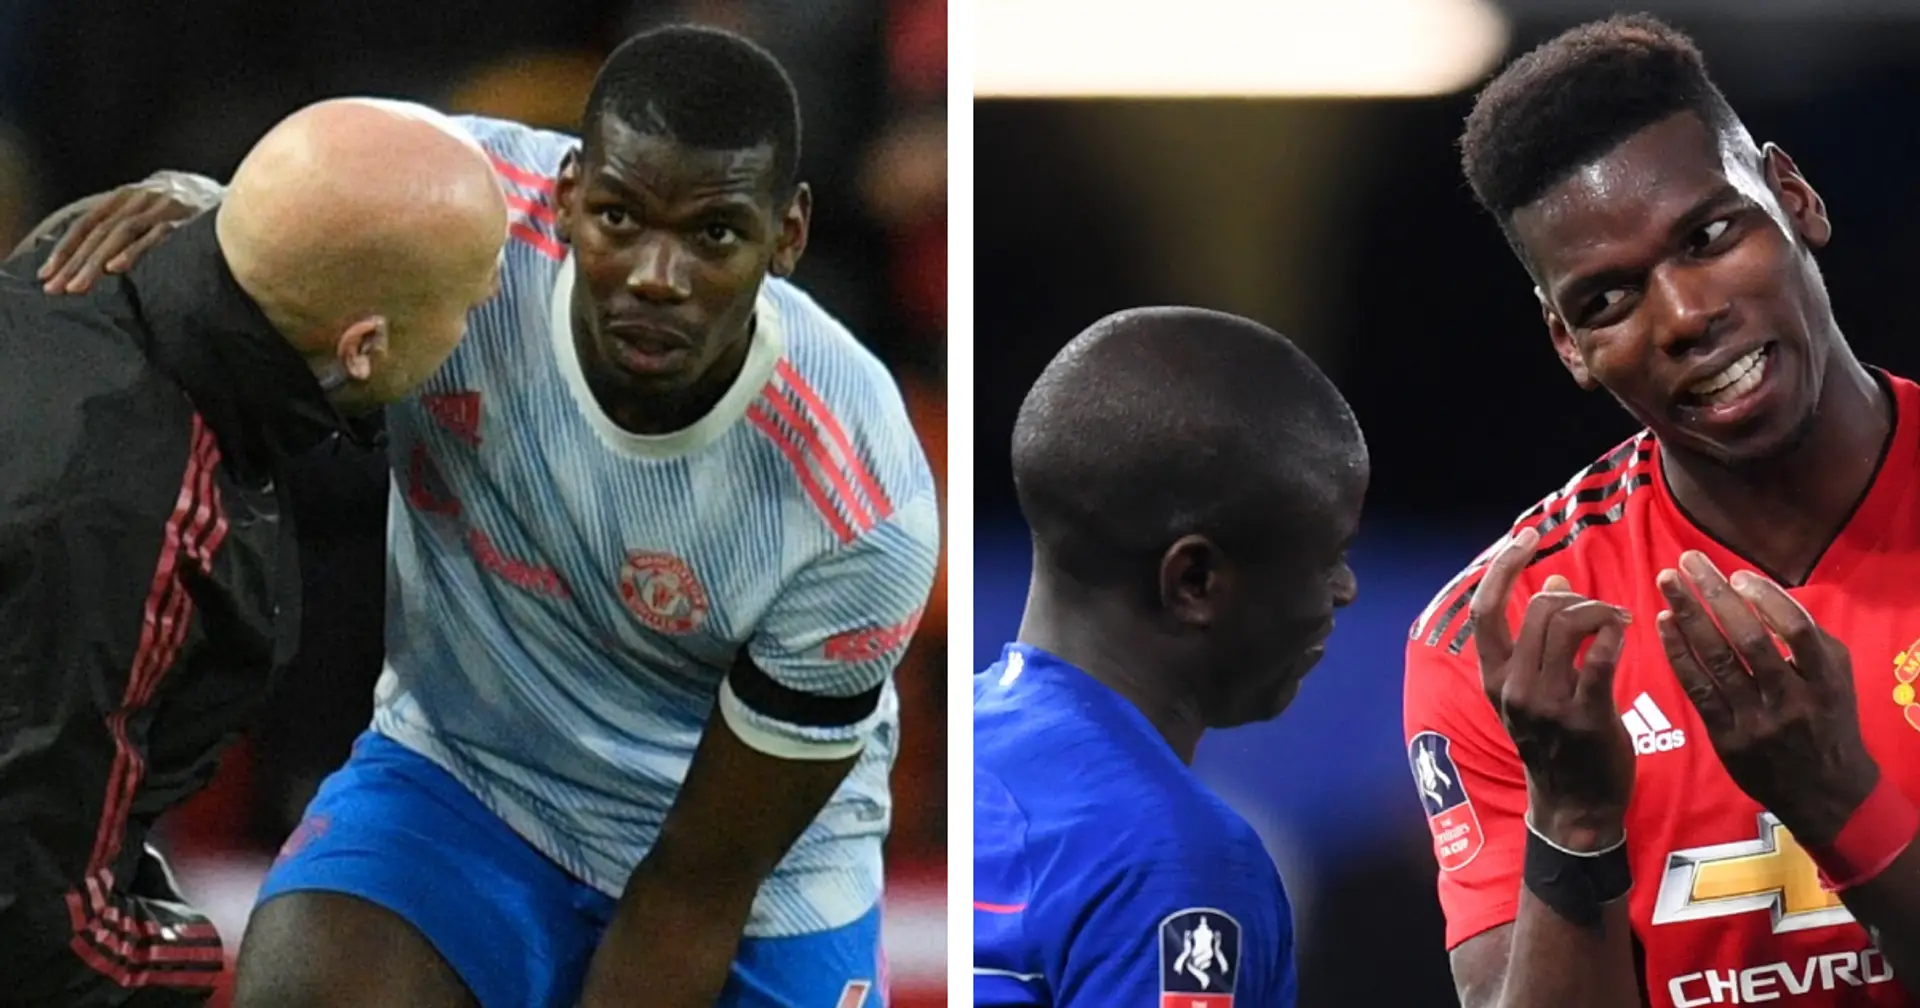 'He looks the part only when he plays with Kante': Paul Pogba criticised after Man United exit